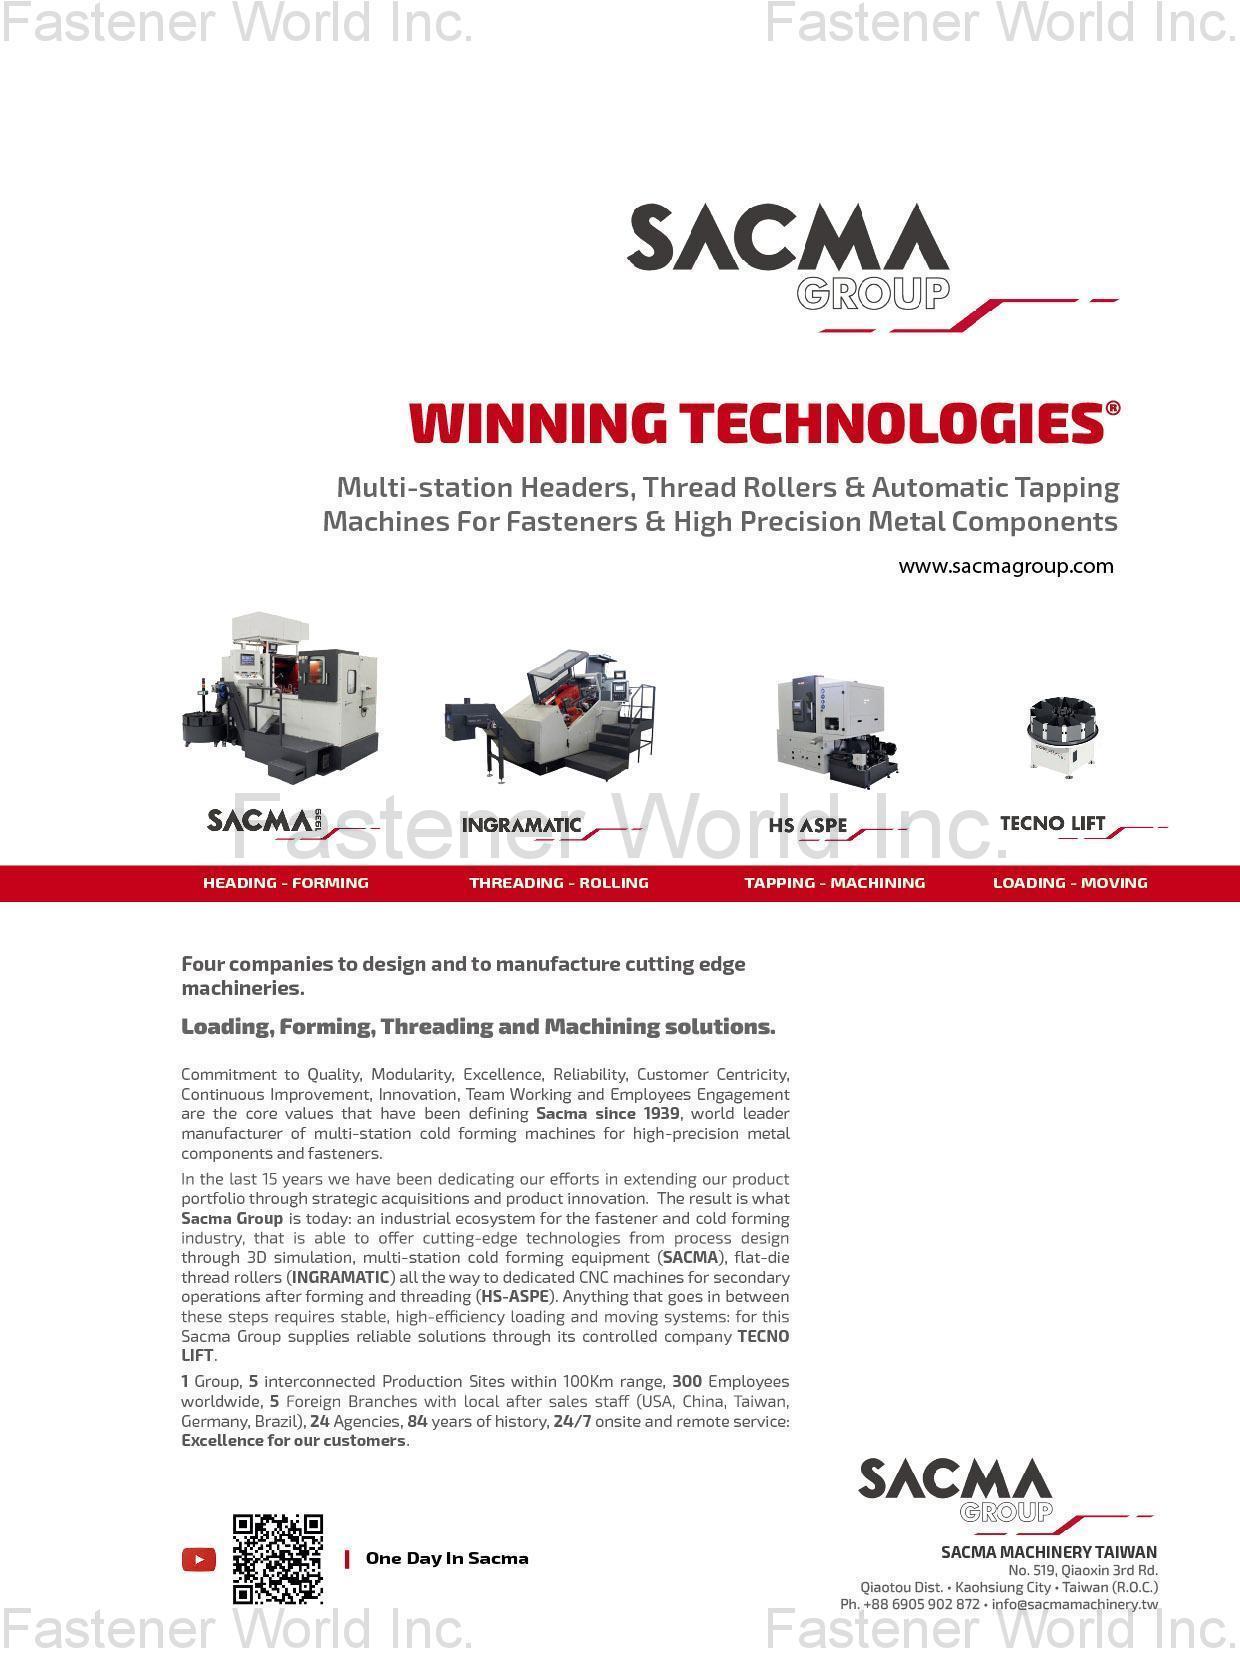 SACMA GROUP , Multi-station Headers, Thread Rollers & Automatic Tapping Machines for Fasteners & High Precision Metal Components